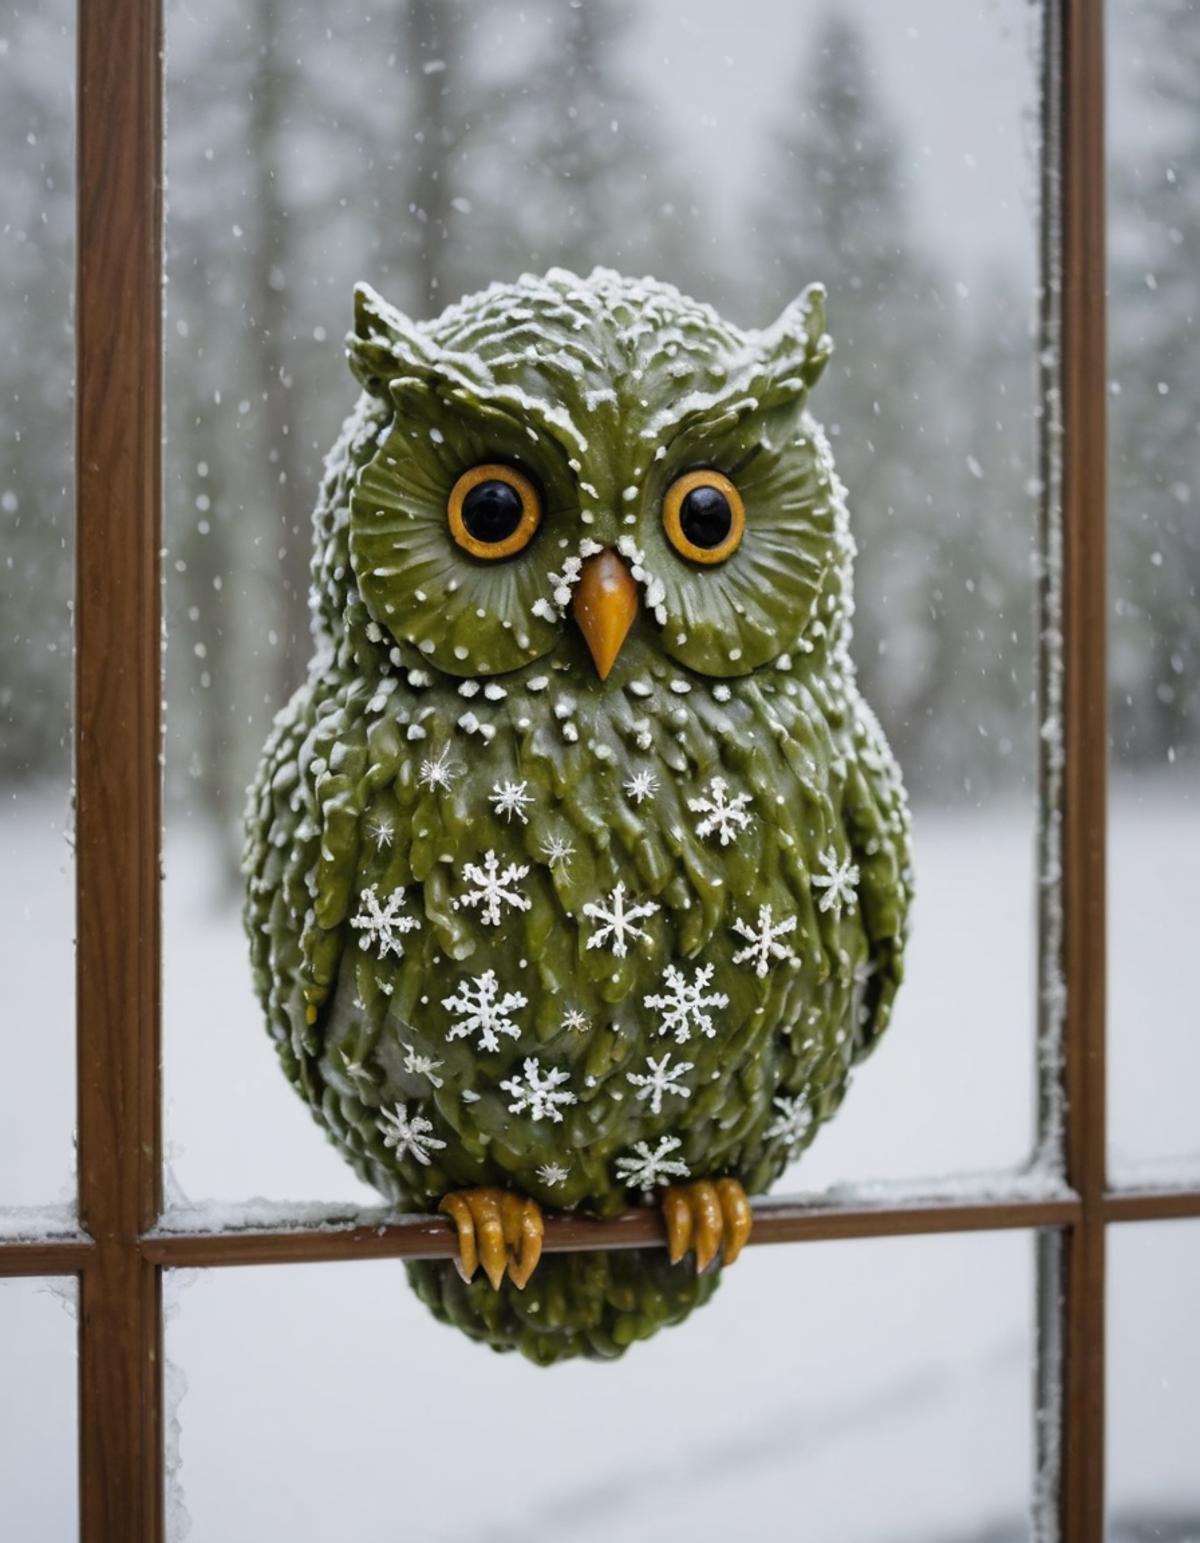 A green owl figurine with snow on it.